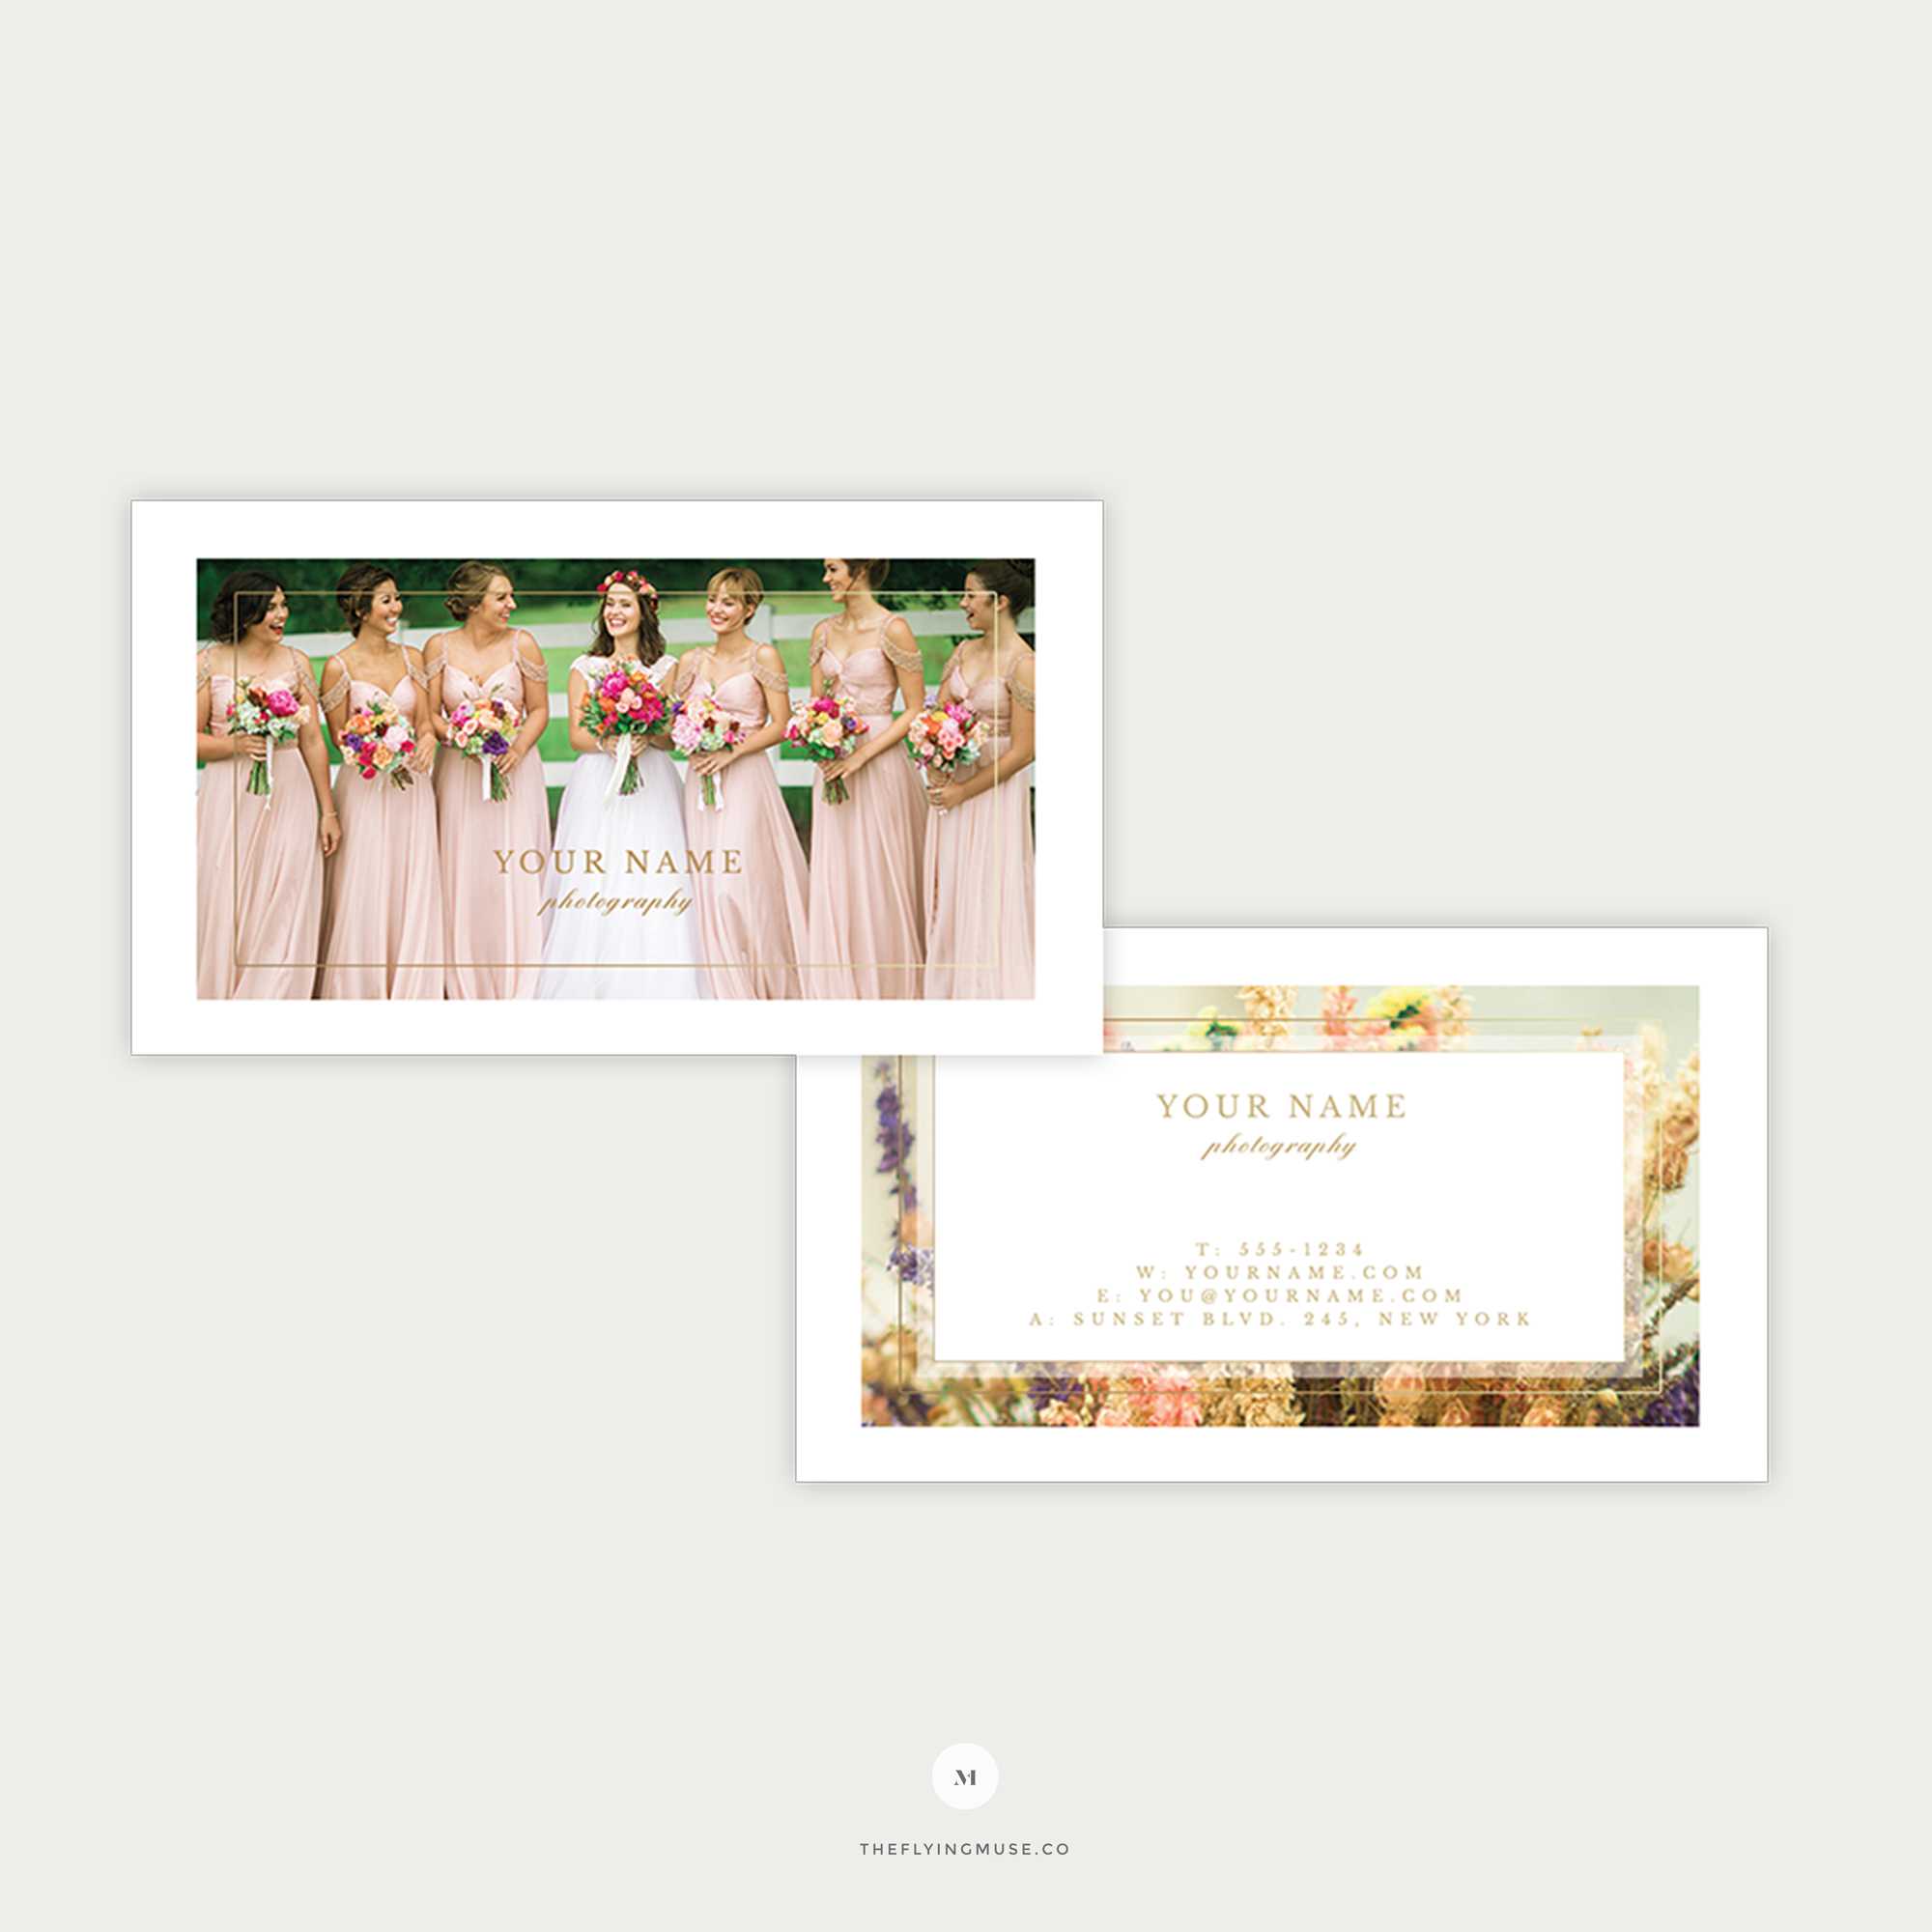 Elegant Wedding Photography Business Card Template | The Flying Muse Inside Photography Referral Card Templates